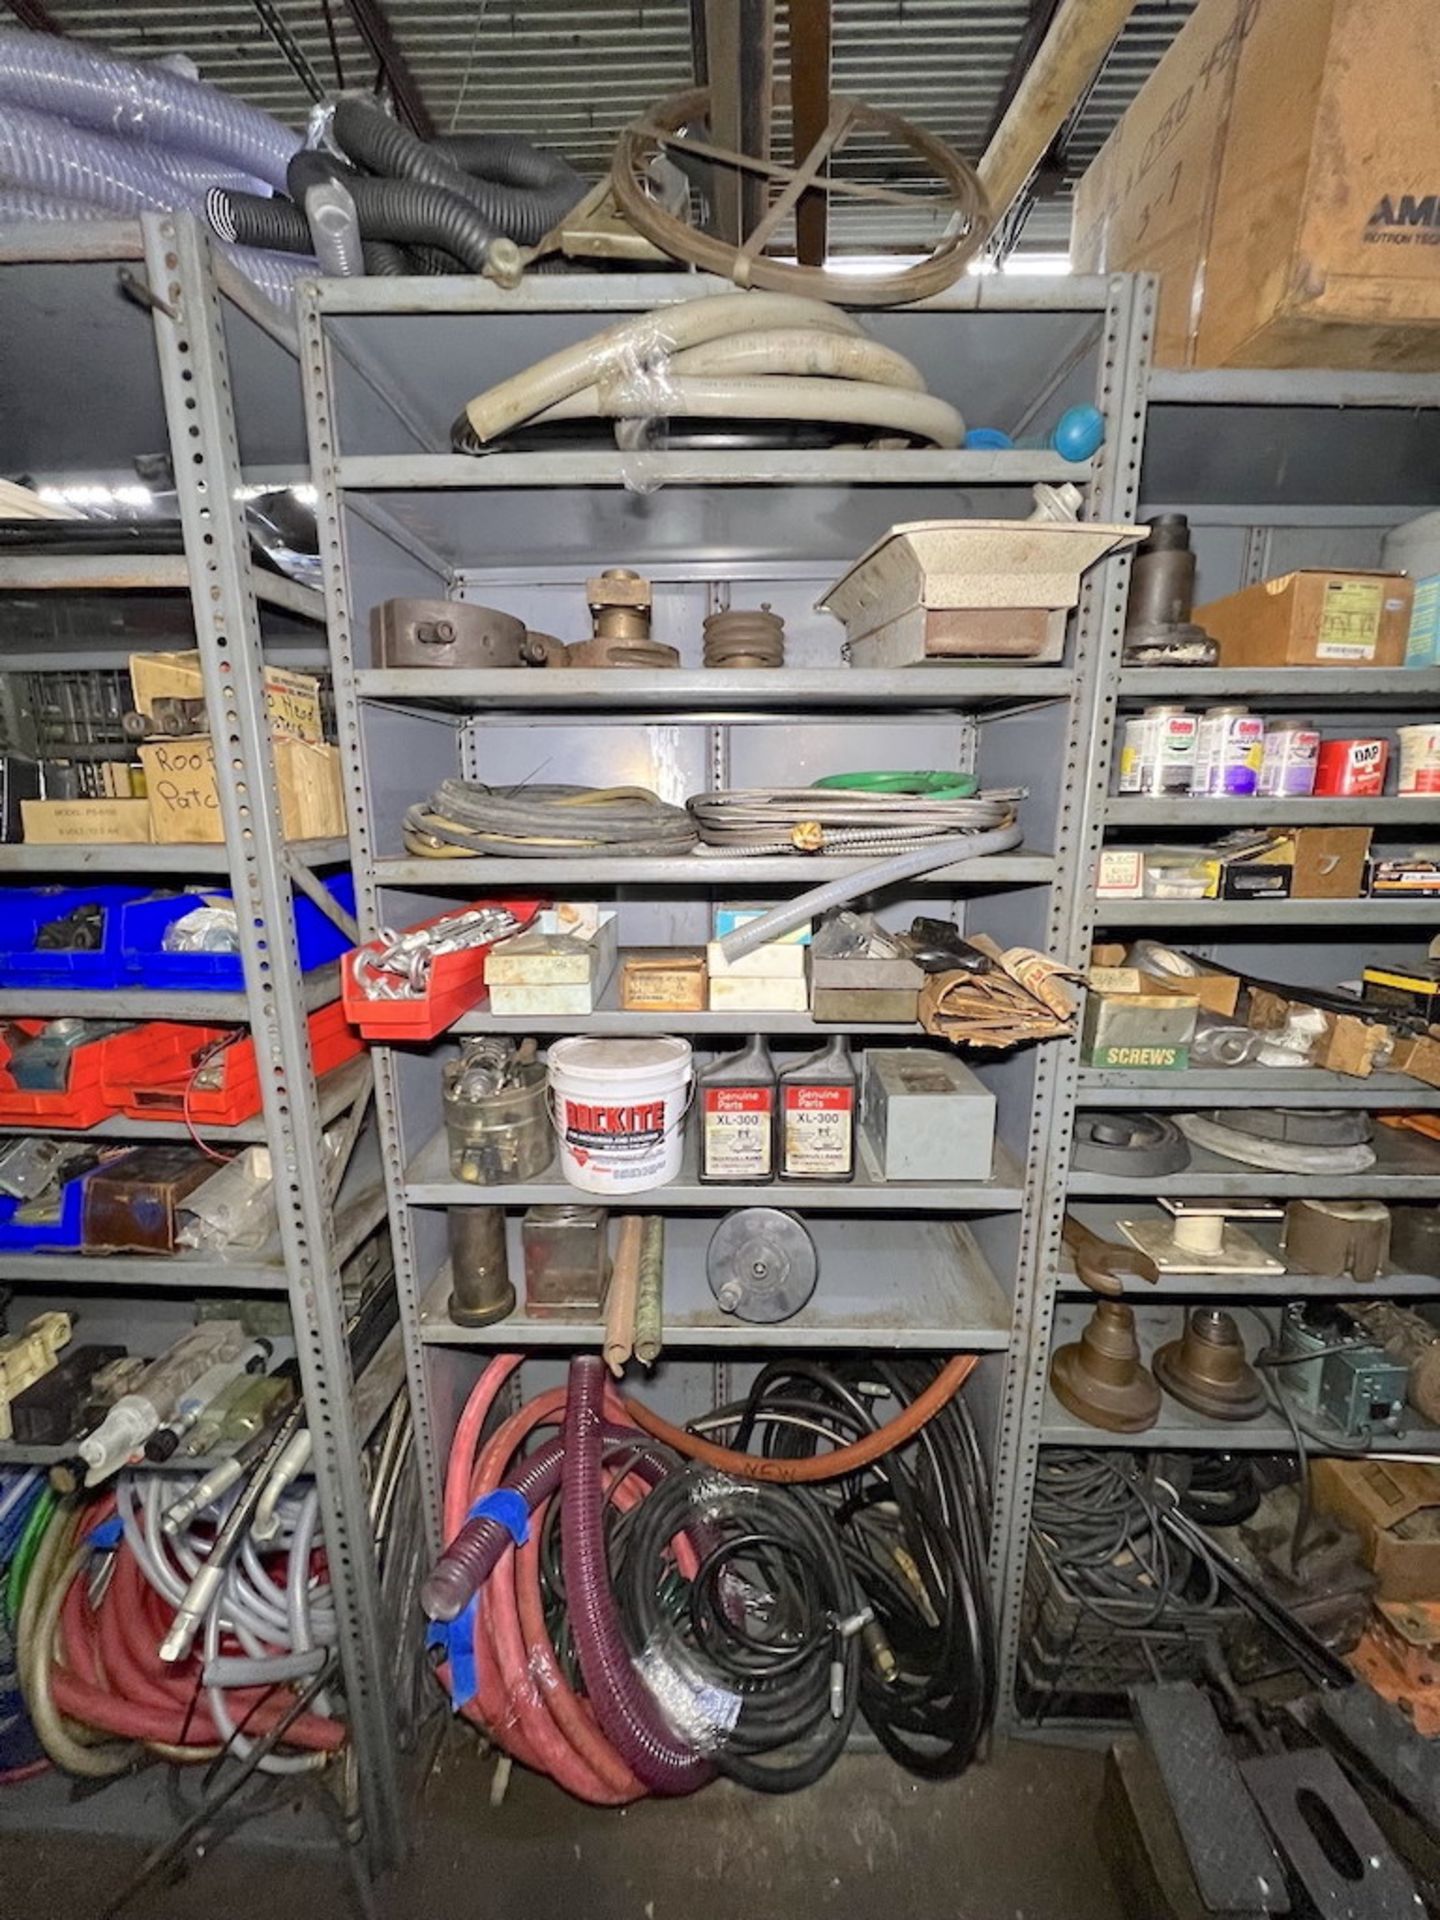 Remaining Contents of Parts Room - Image 10 of 60